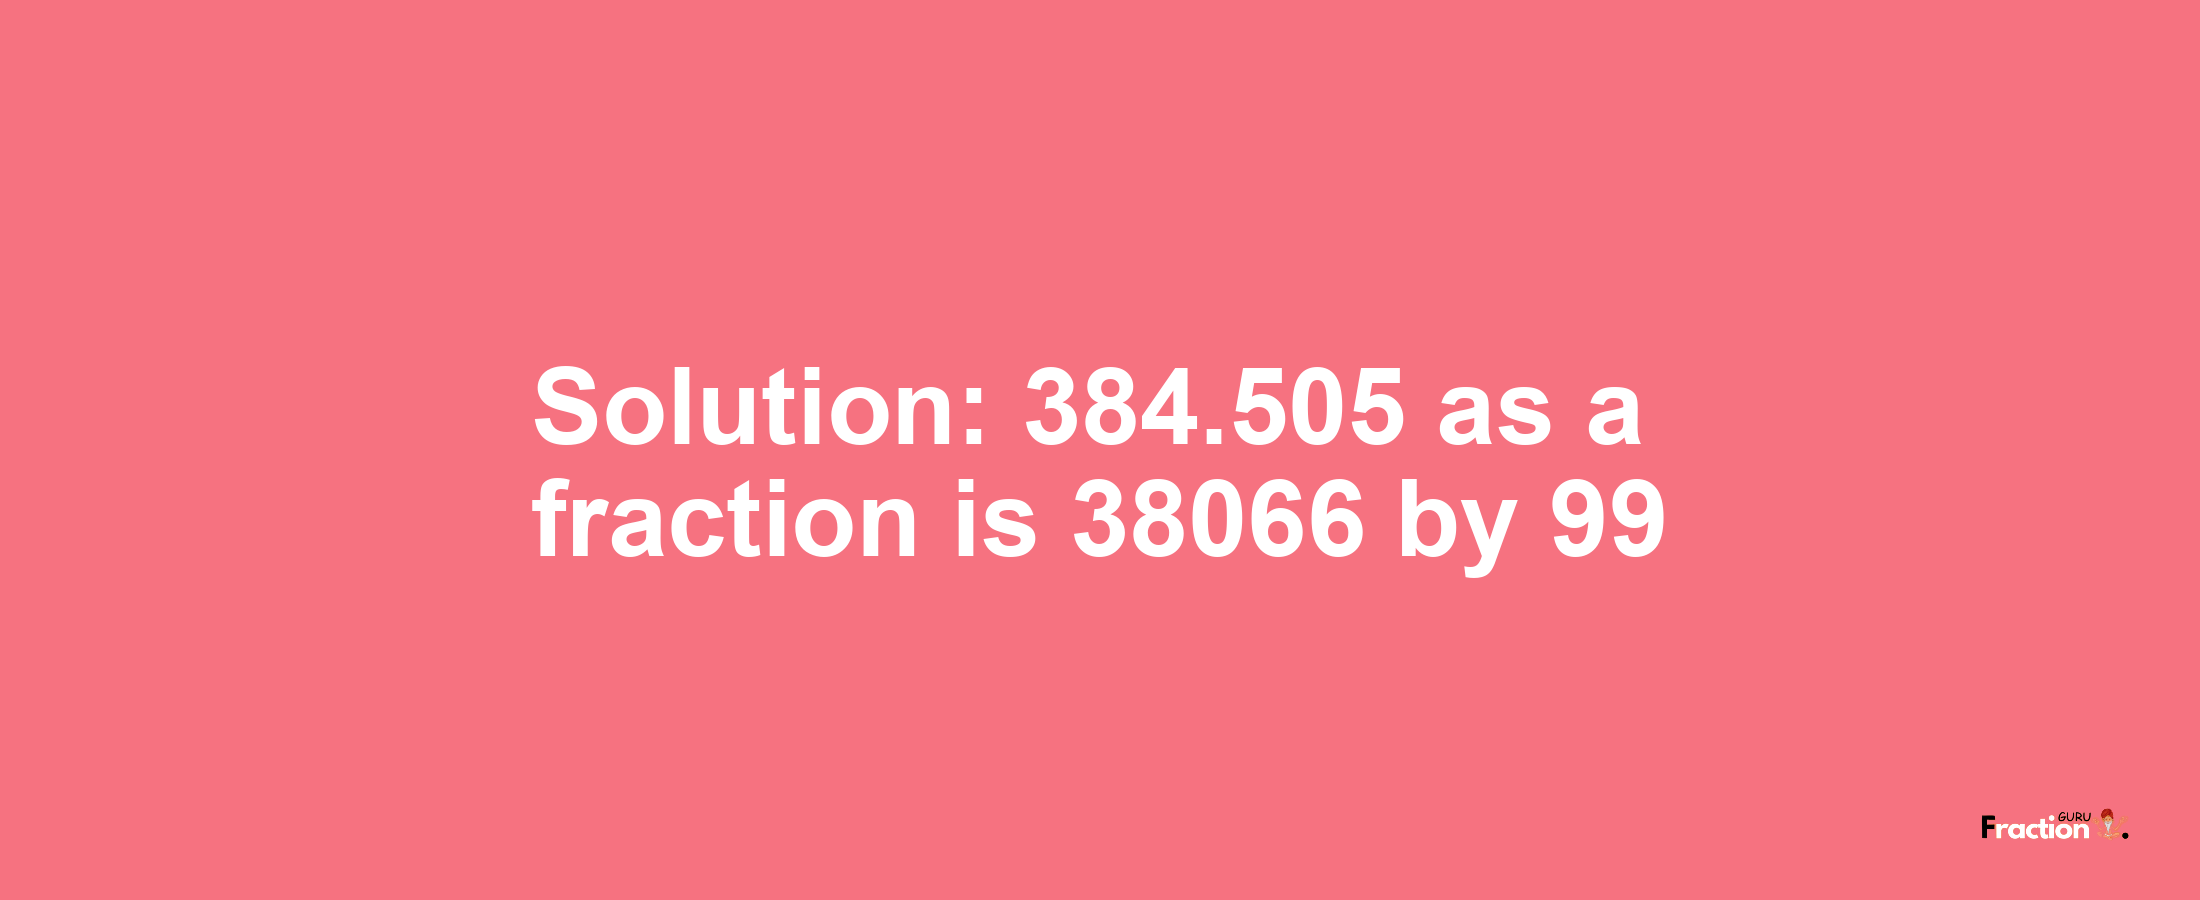 Solution:384.505 as a fraction is 38066/99